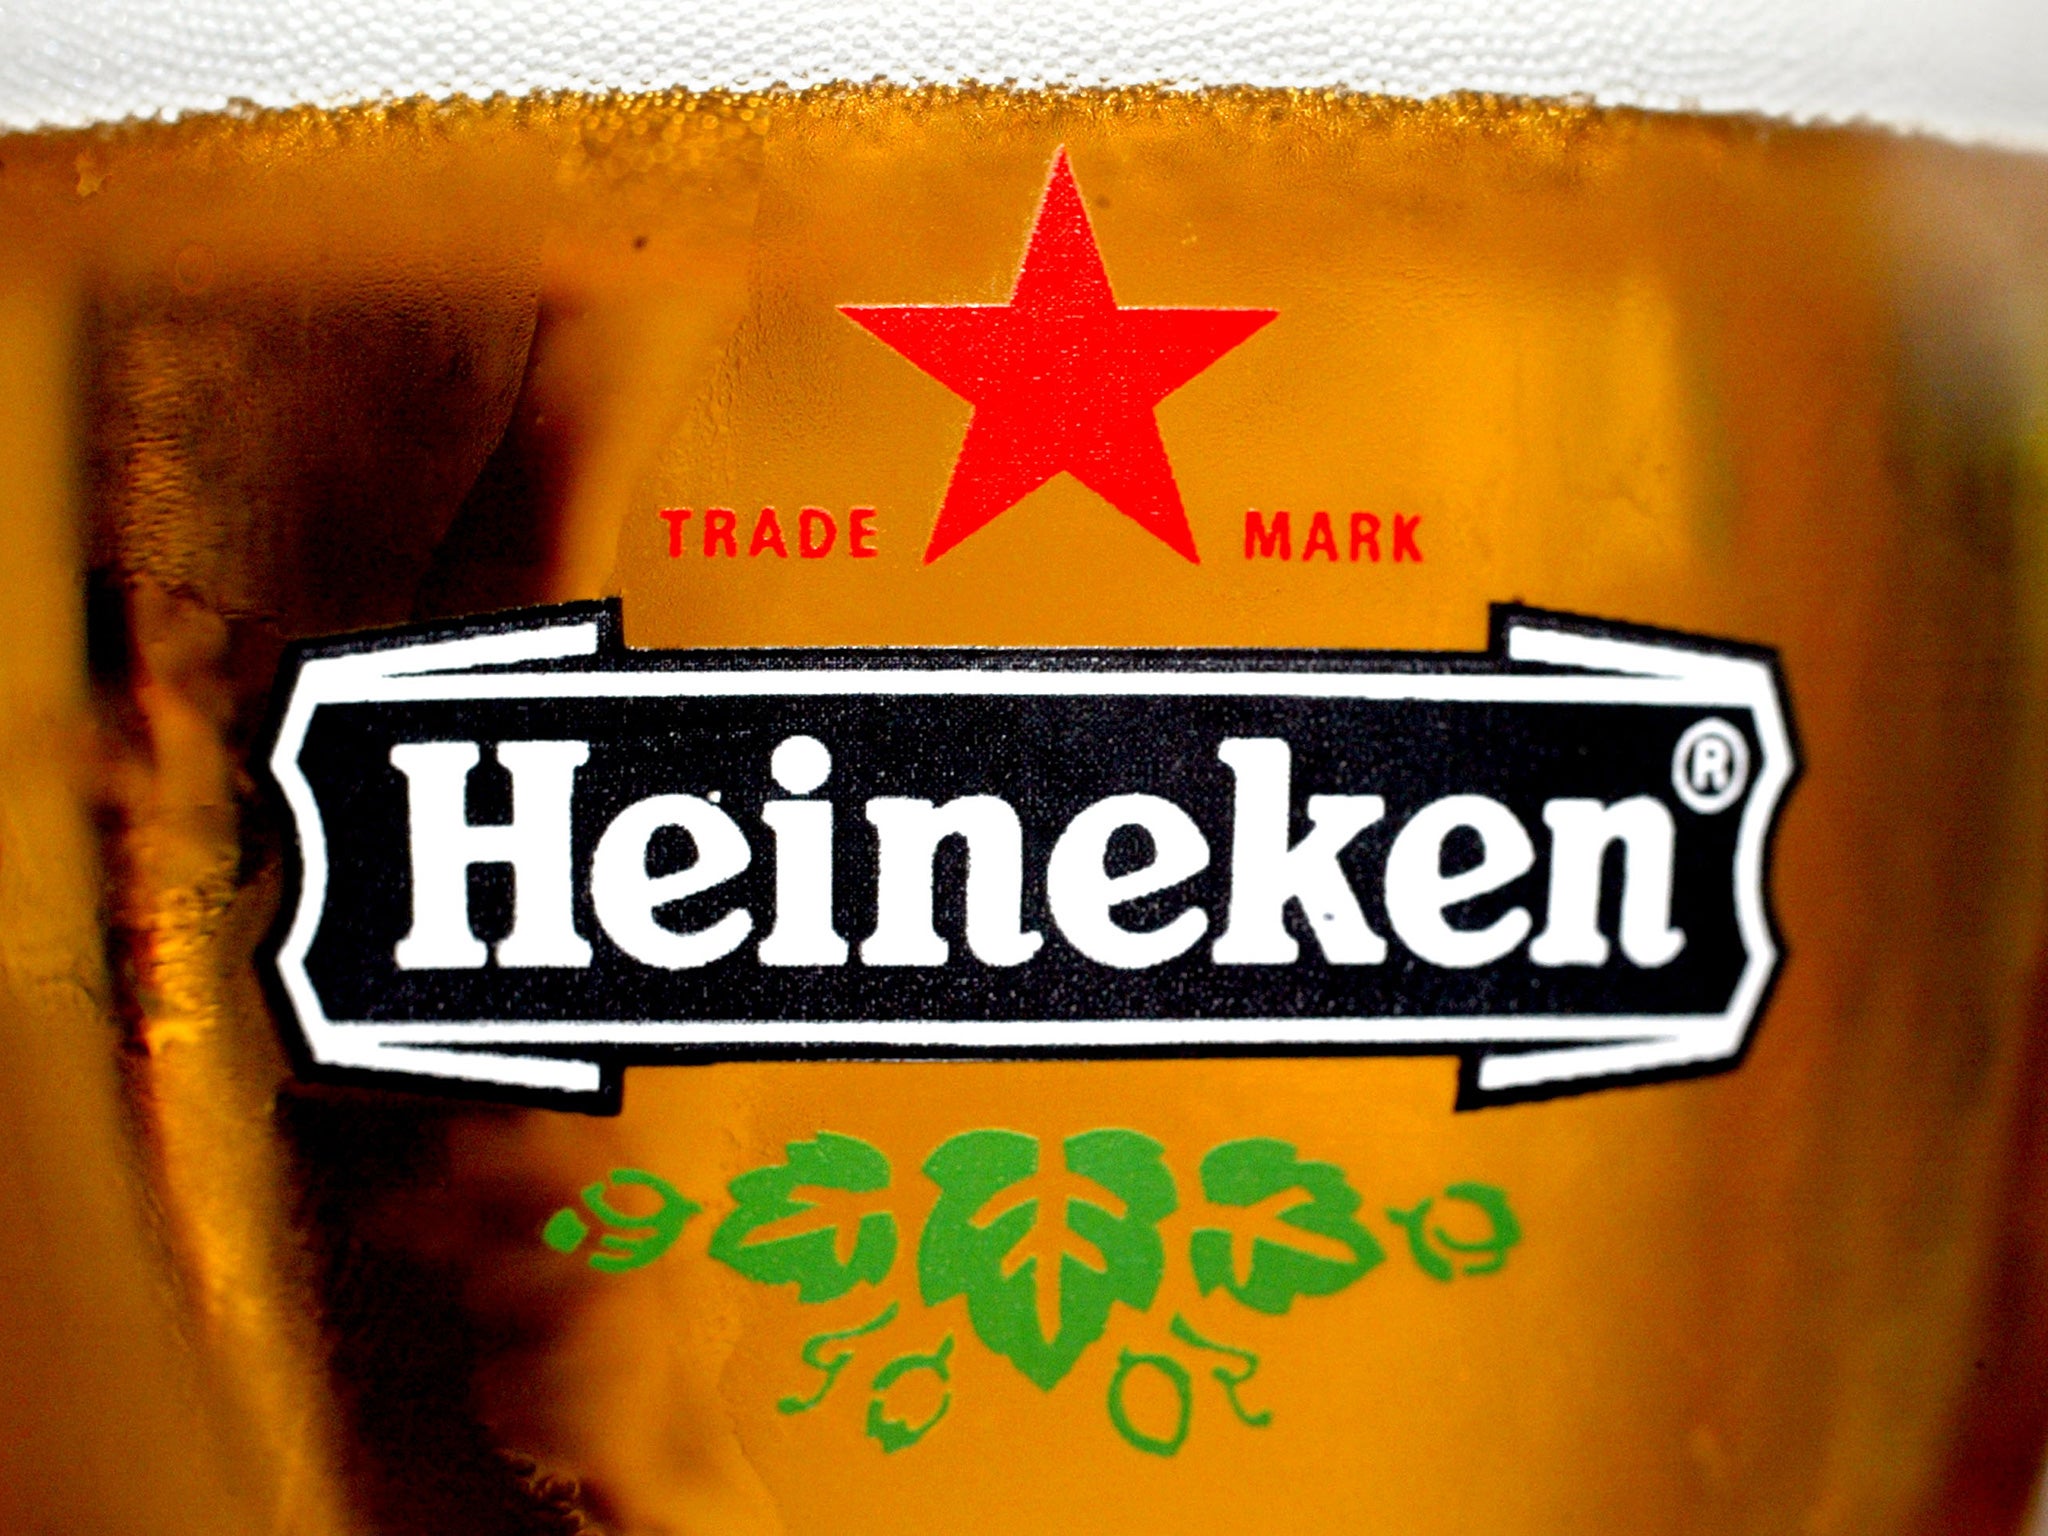 Weaker currencies have hit Heineken's earnings in the UK, Mexico and Nigeria - some of its biggest markets